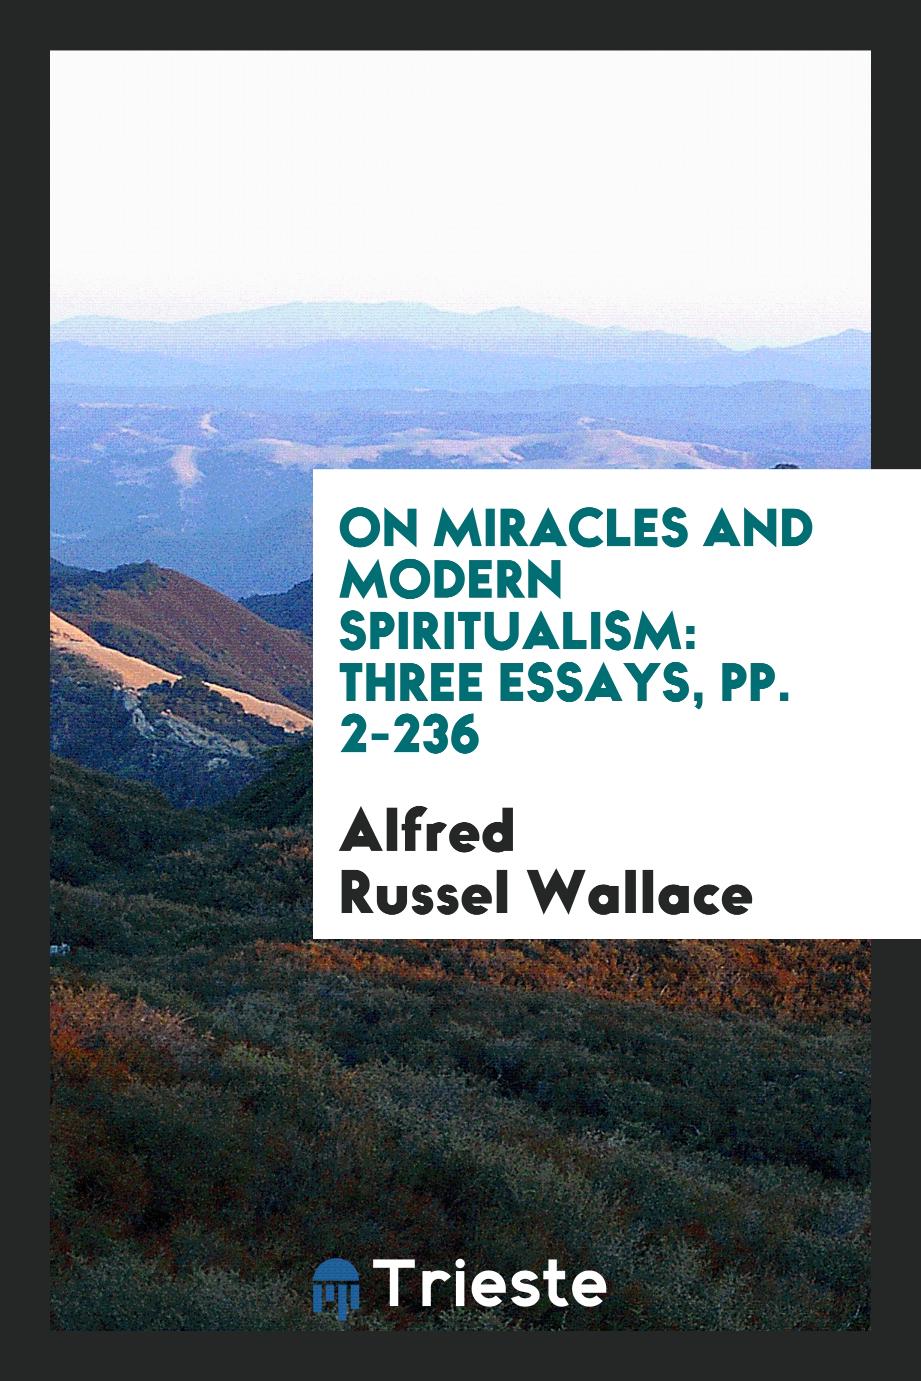 On Miracles and Modern Spiritualism: Three Essays, pp. 2-236